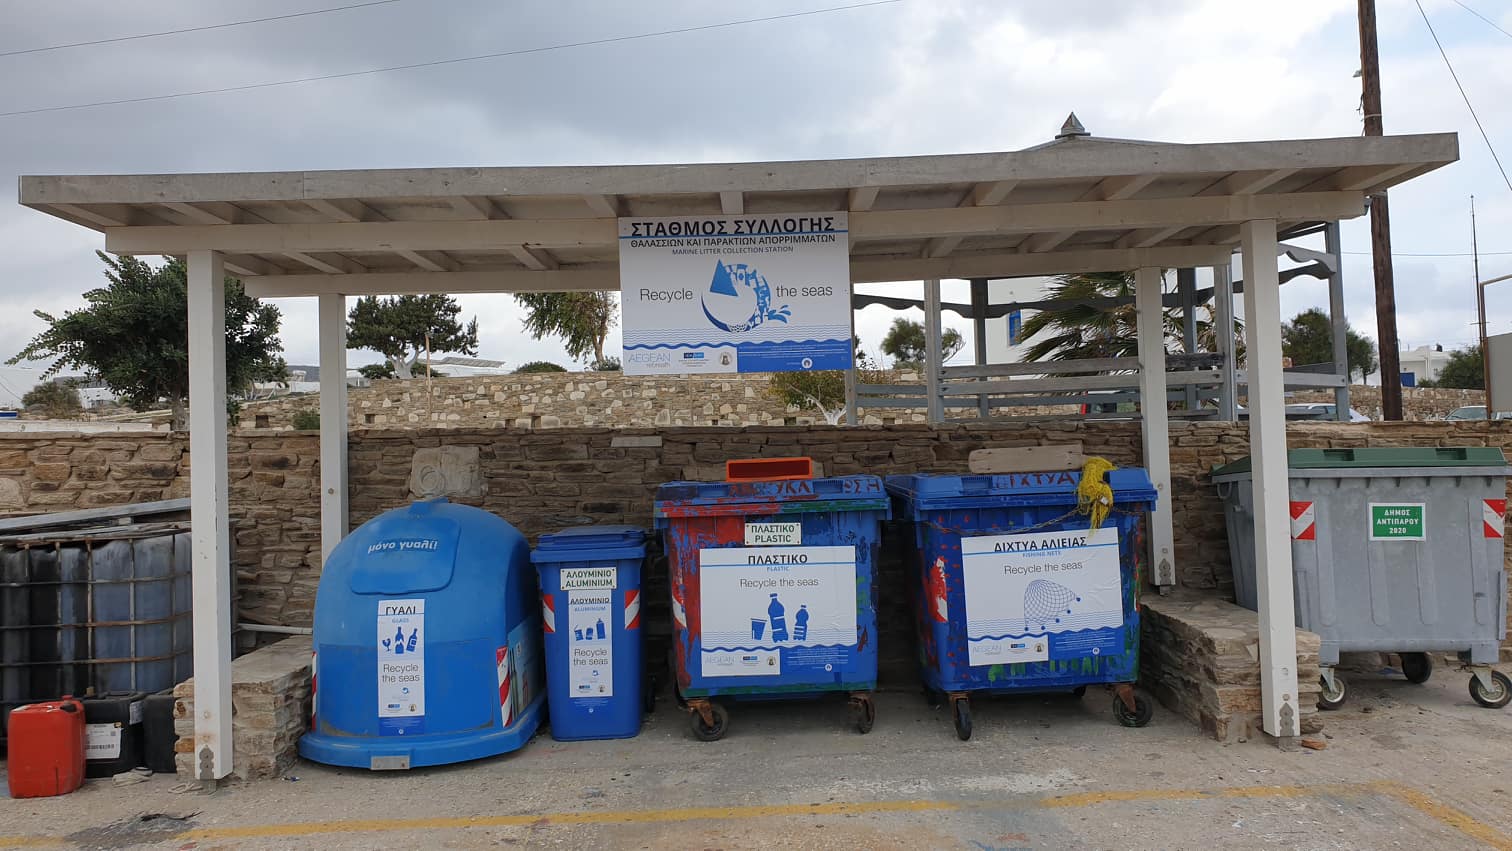 Antiparos is actively addressing the issue of marine litter